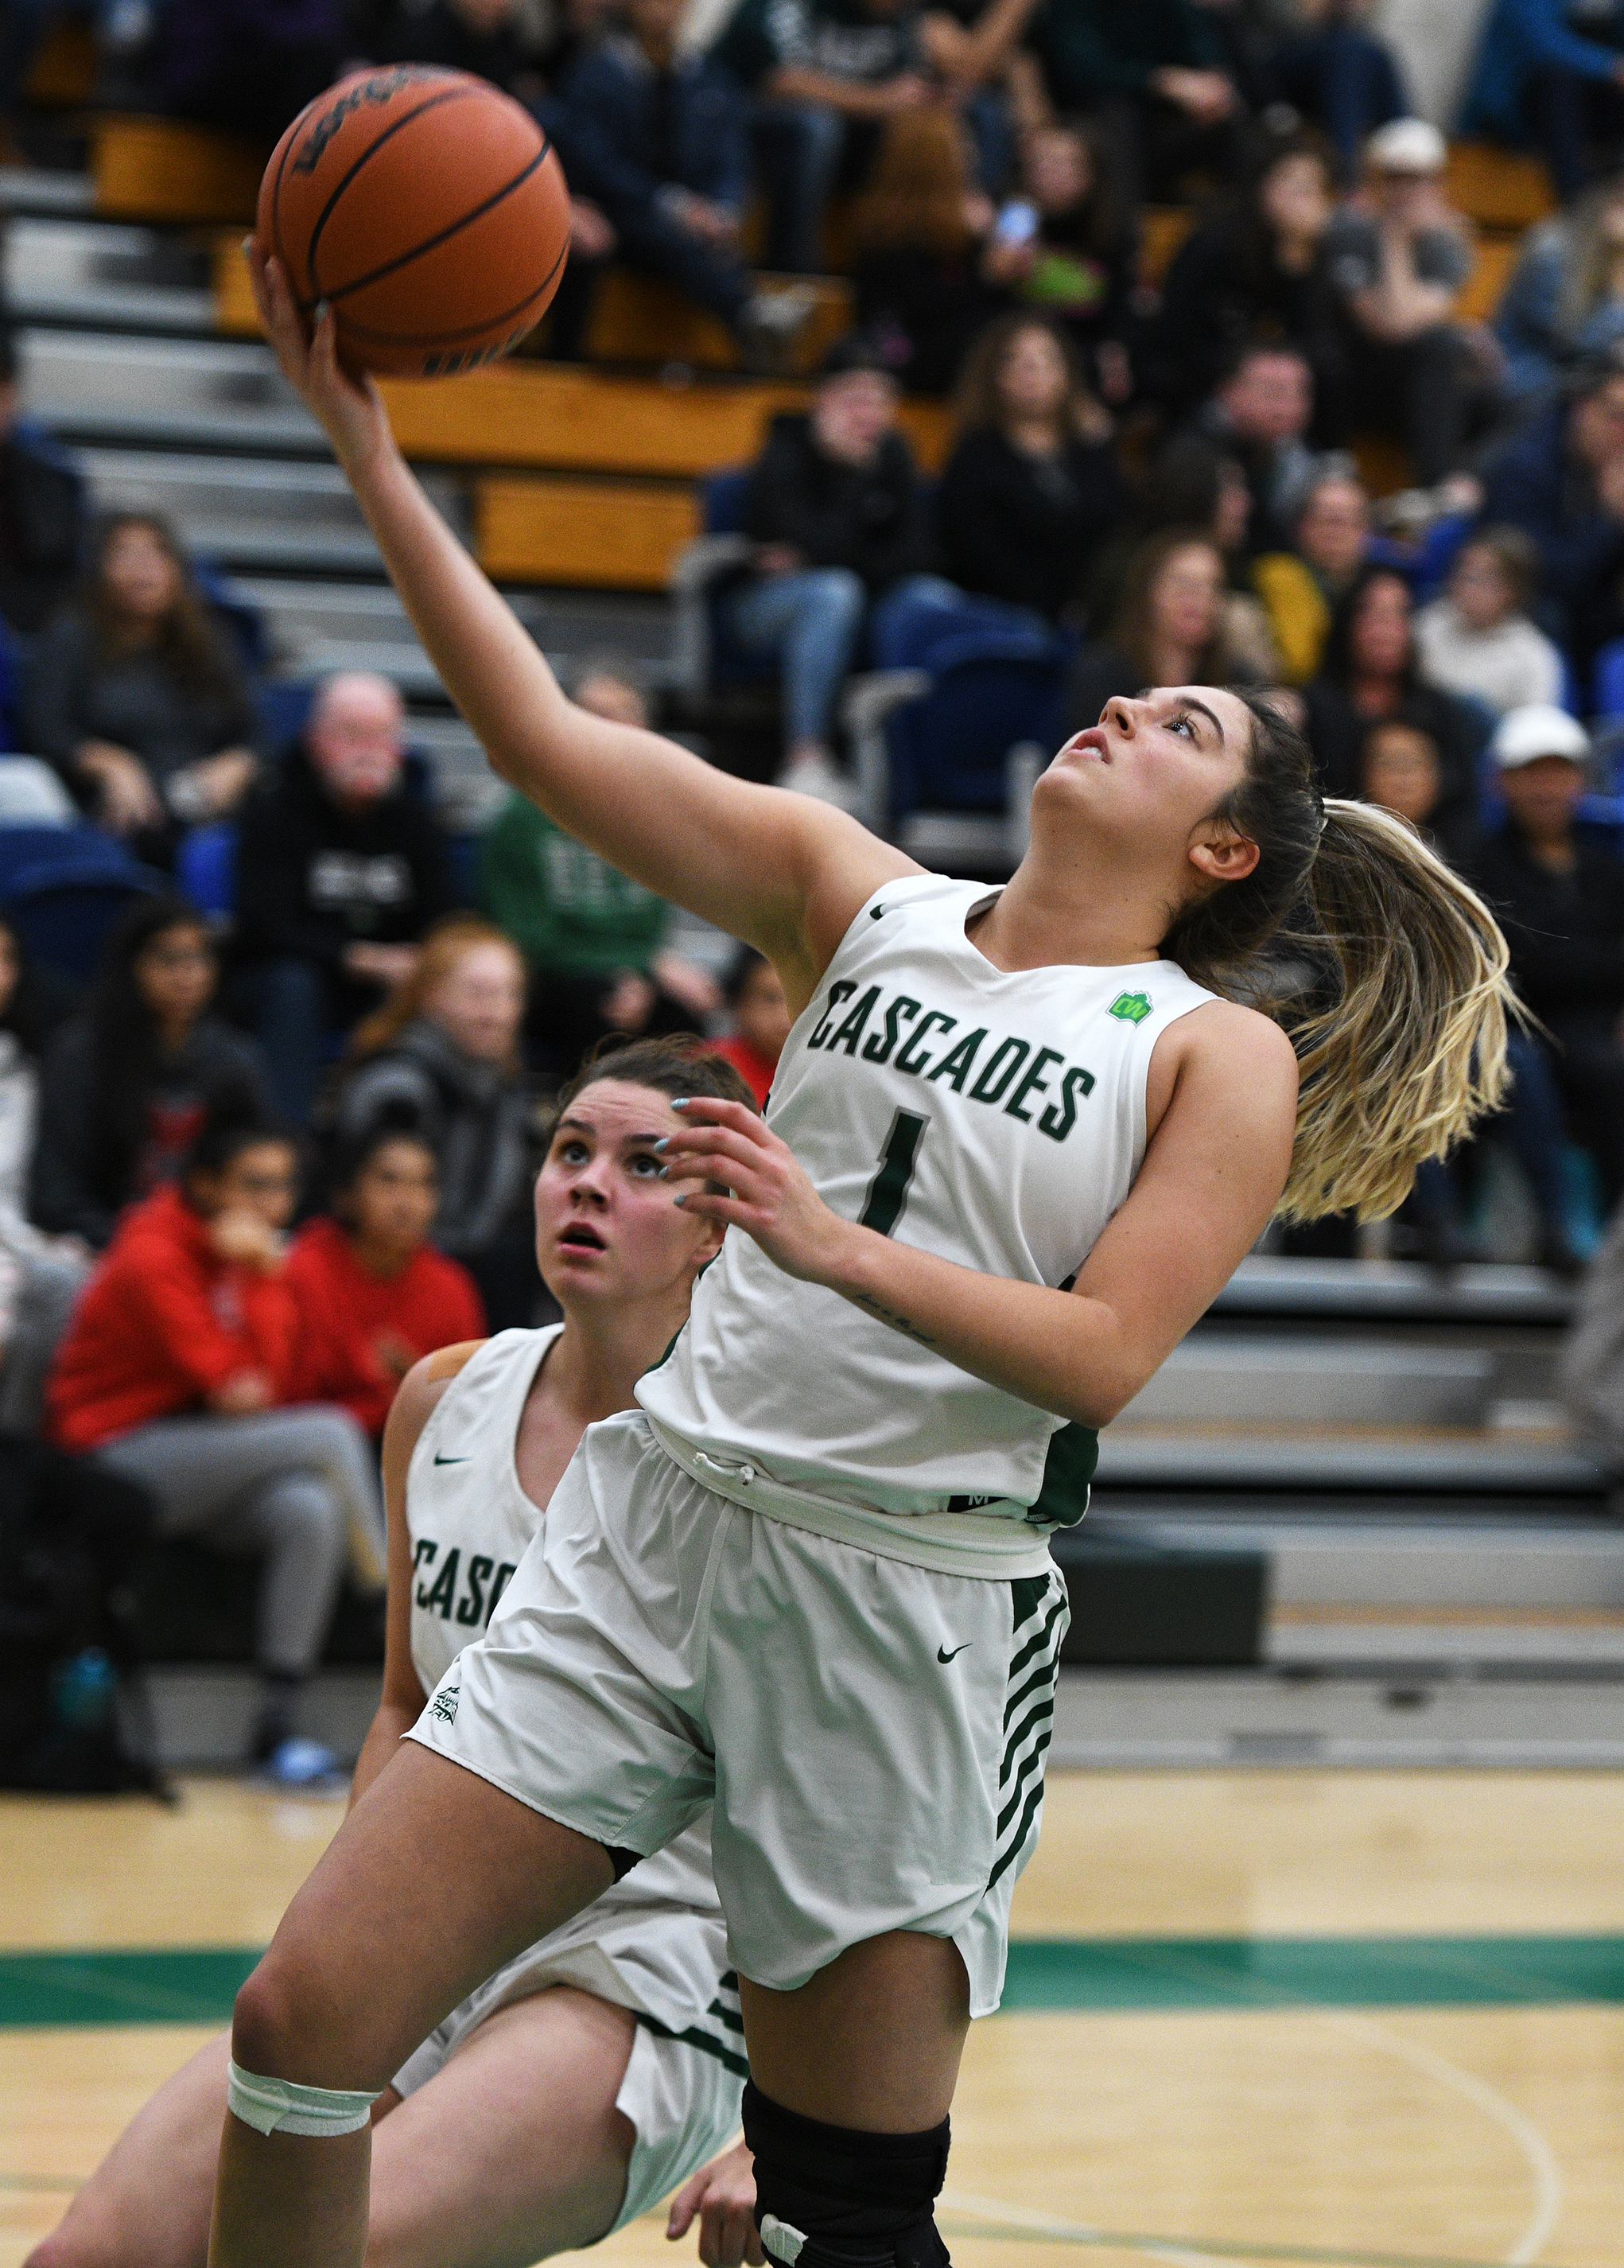 The UFV women’s basketball team dominates in their home opening weekend